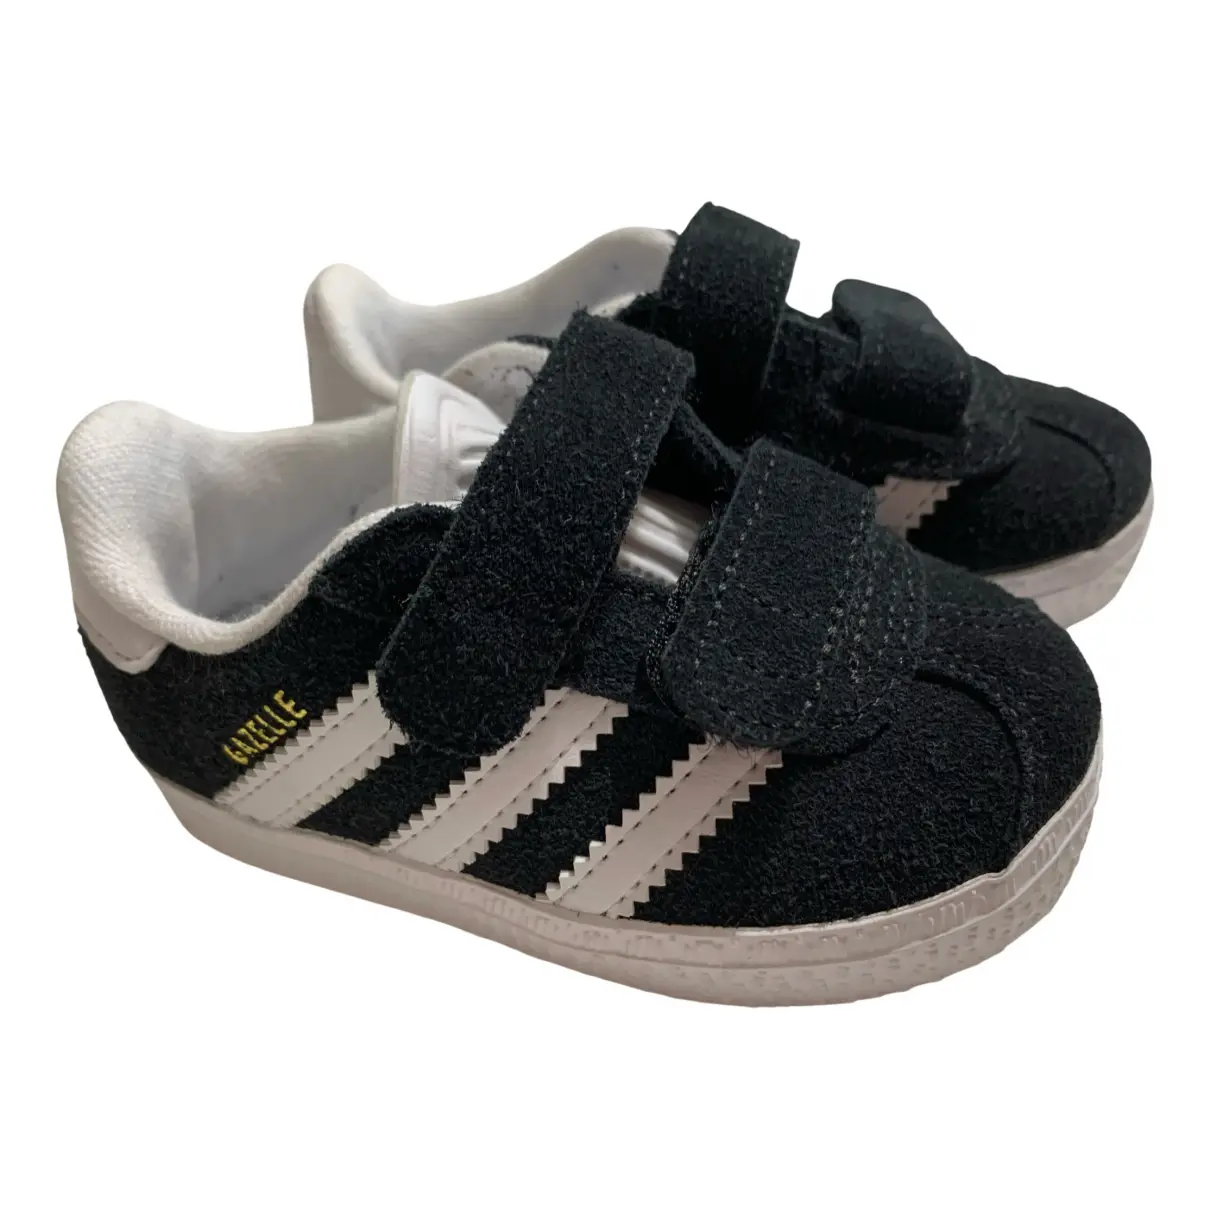 Gazelle first shoes Adidas